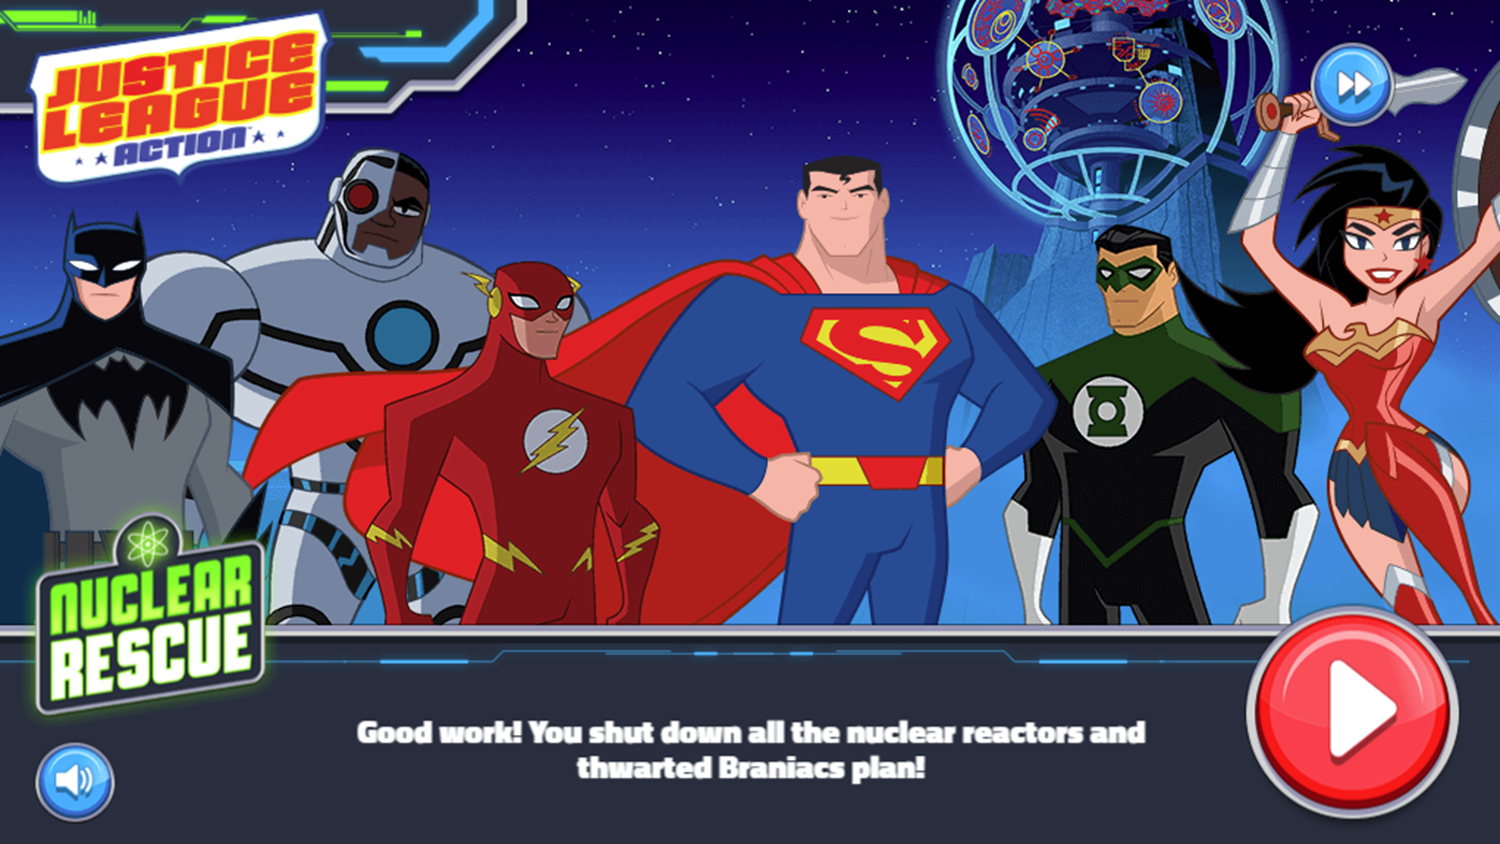 Justice League Action Nuclear Rescue Game Beat Screenshot.